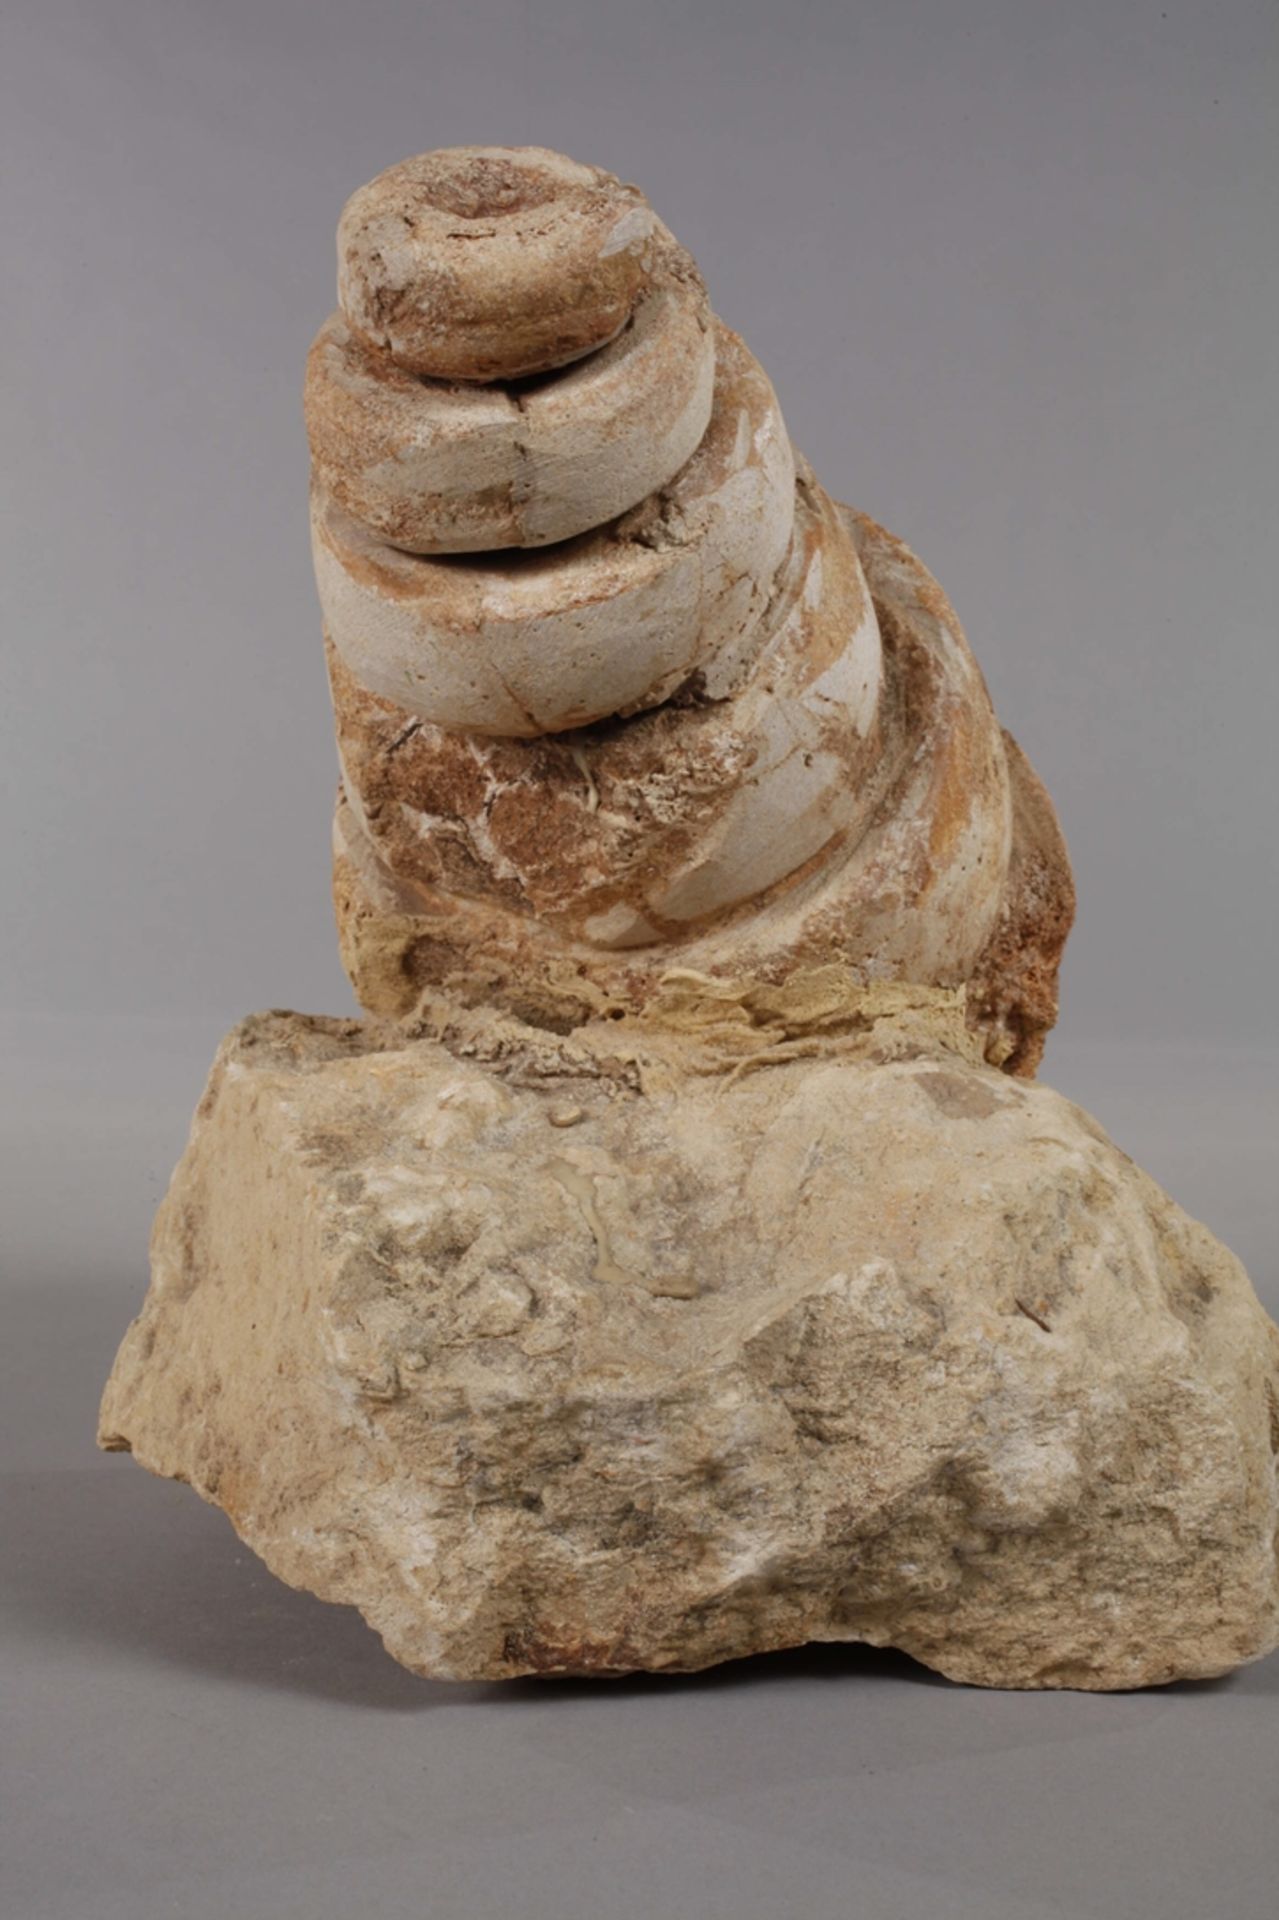 Tower snail - Image 4 of 6